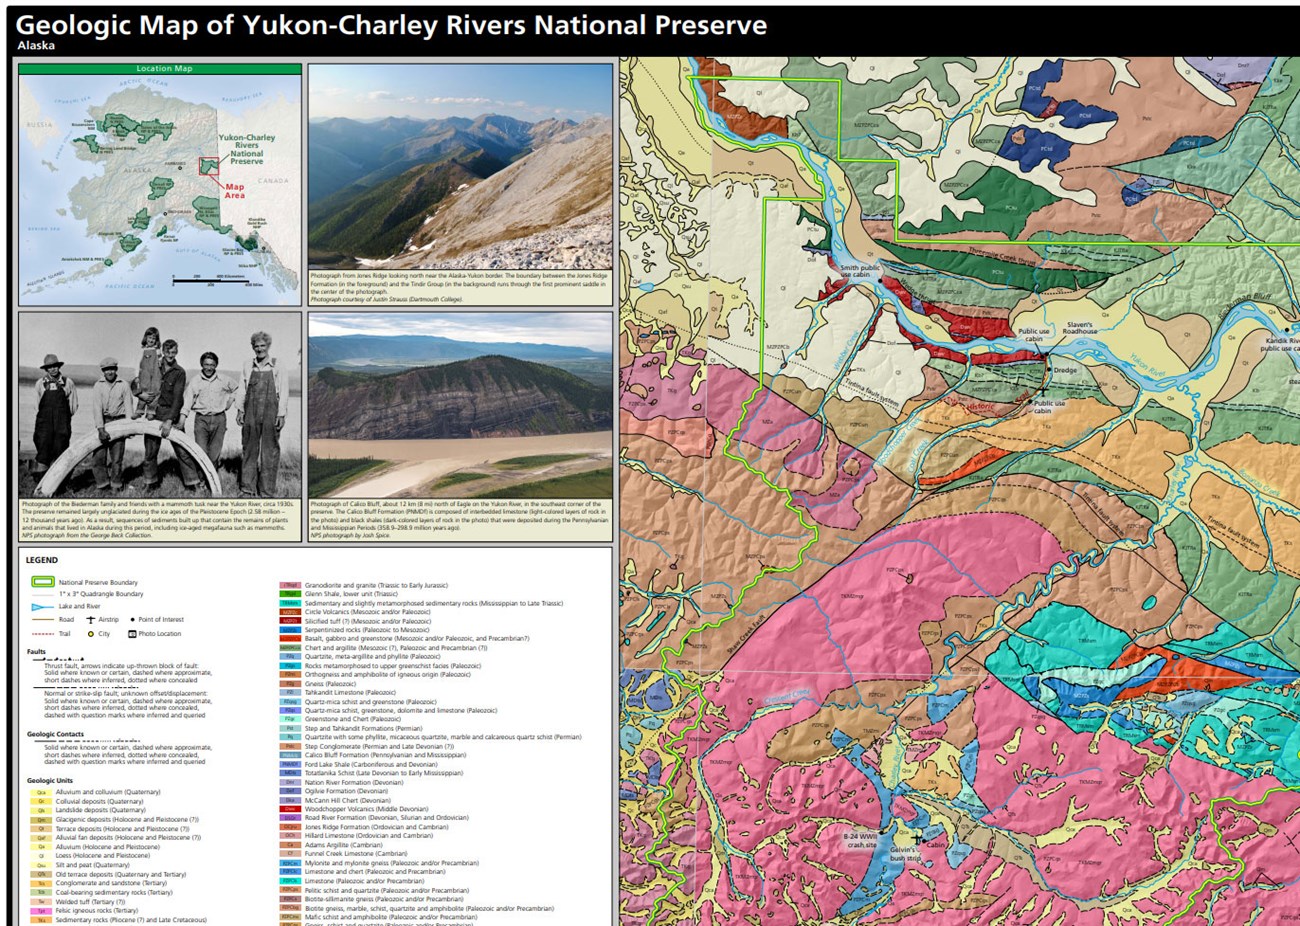 Image of a geologic map showing portions of photos, geologic units and contacts, and map legend.